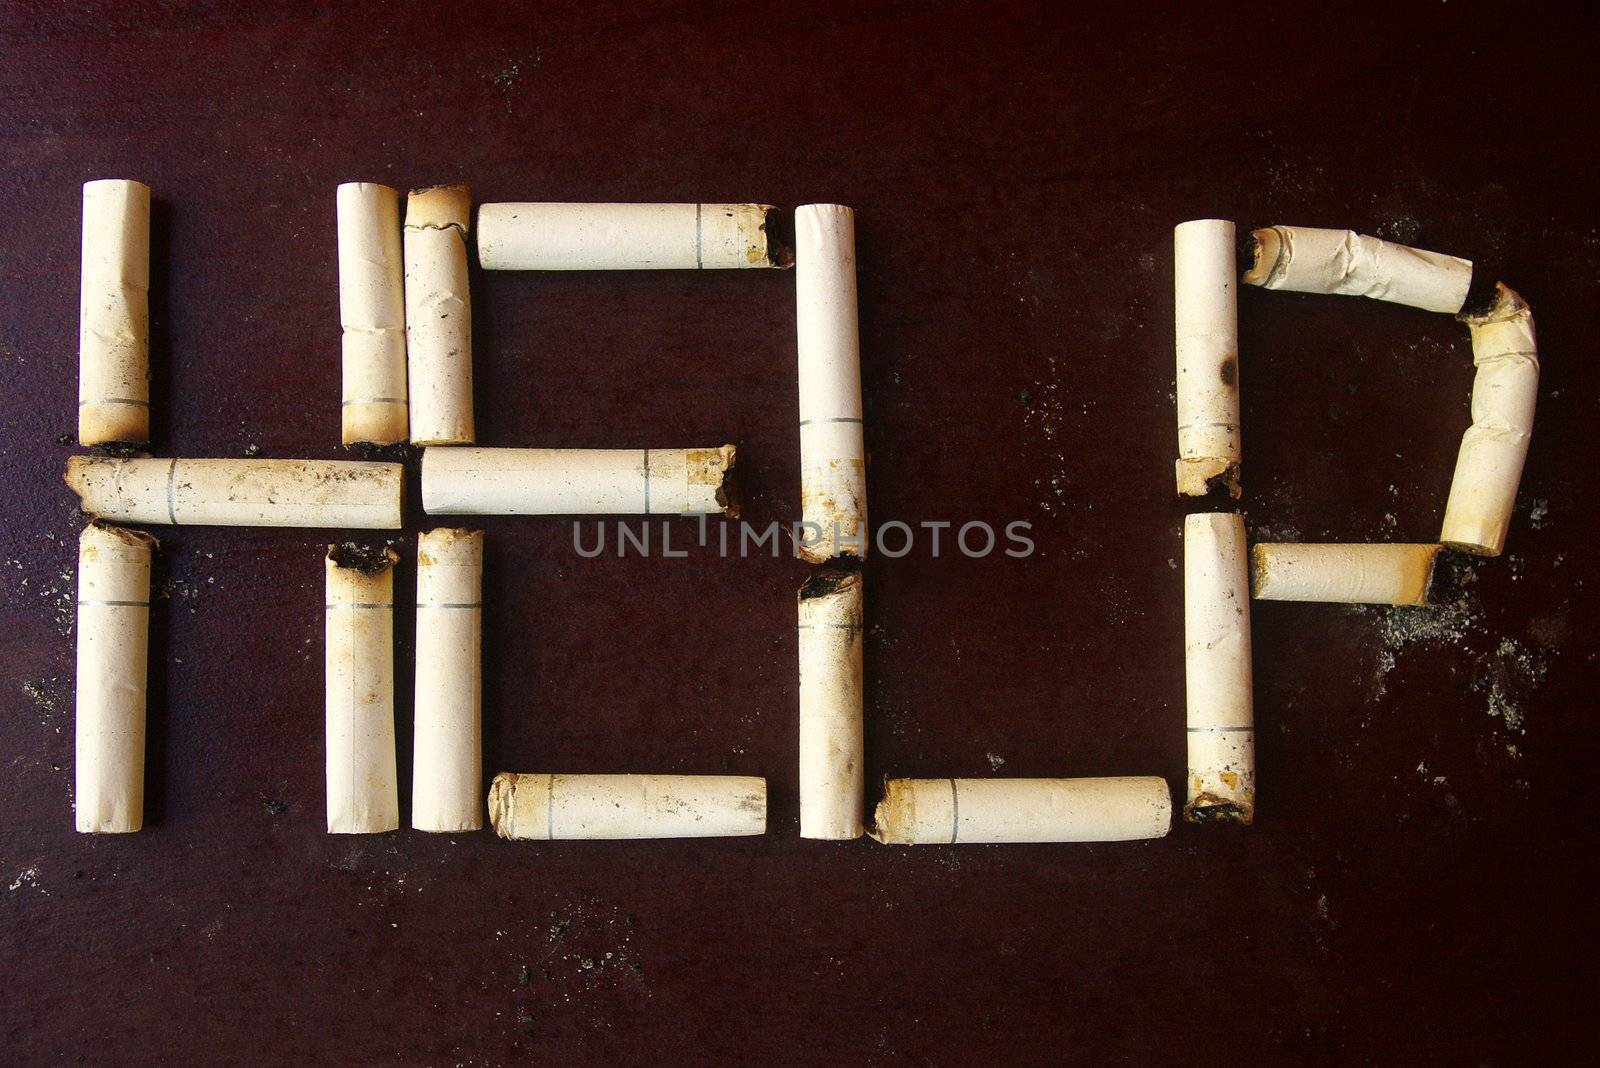 Cigarette butts used to form the word help.